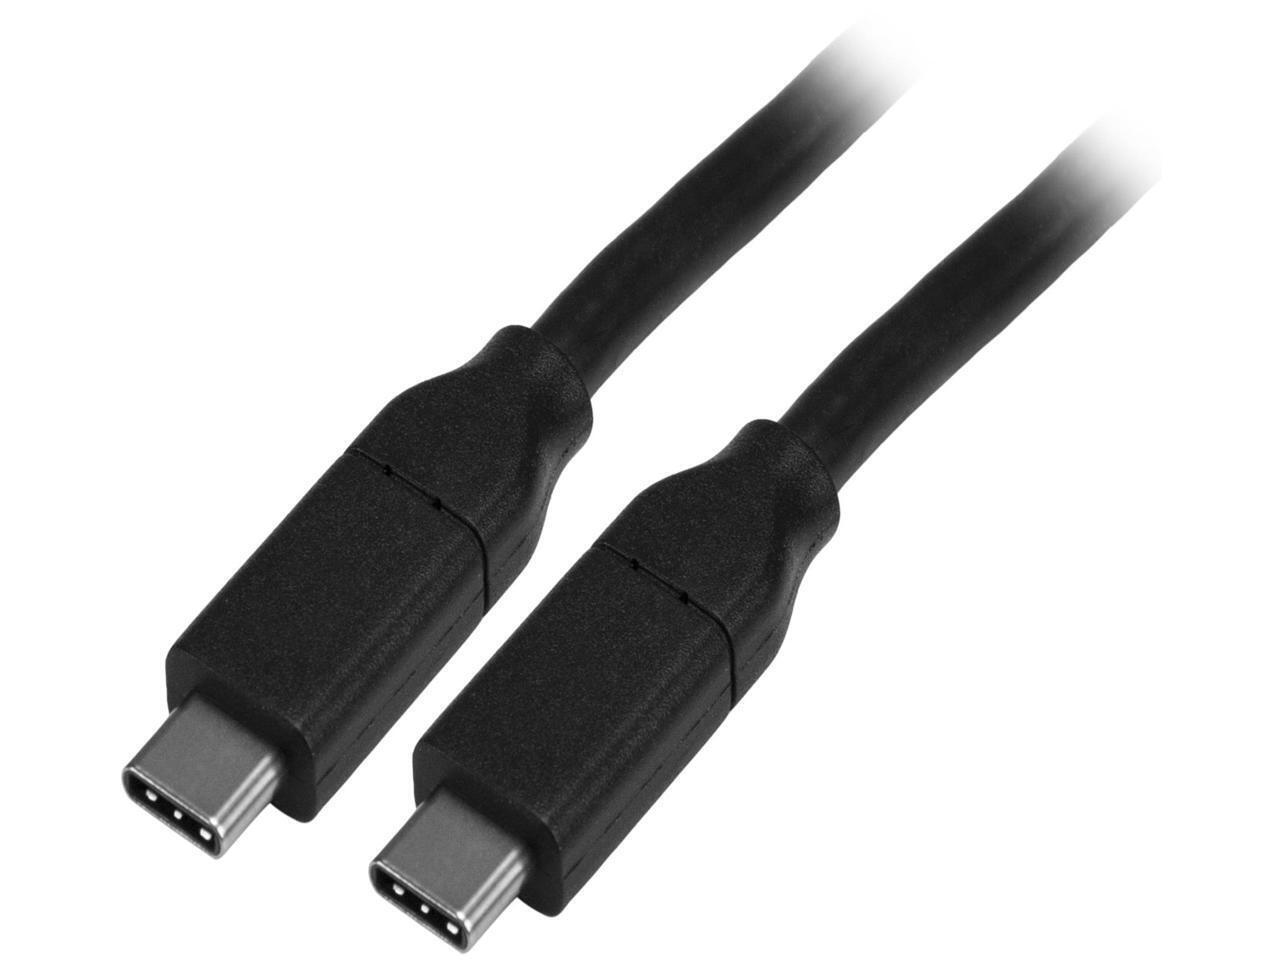 StarTech.com USB2C5C4M Black USB-C Cable with Power Delivery (5A) - USB 2.0 -